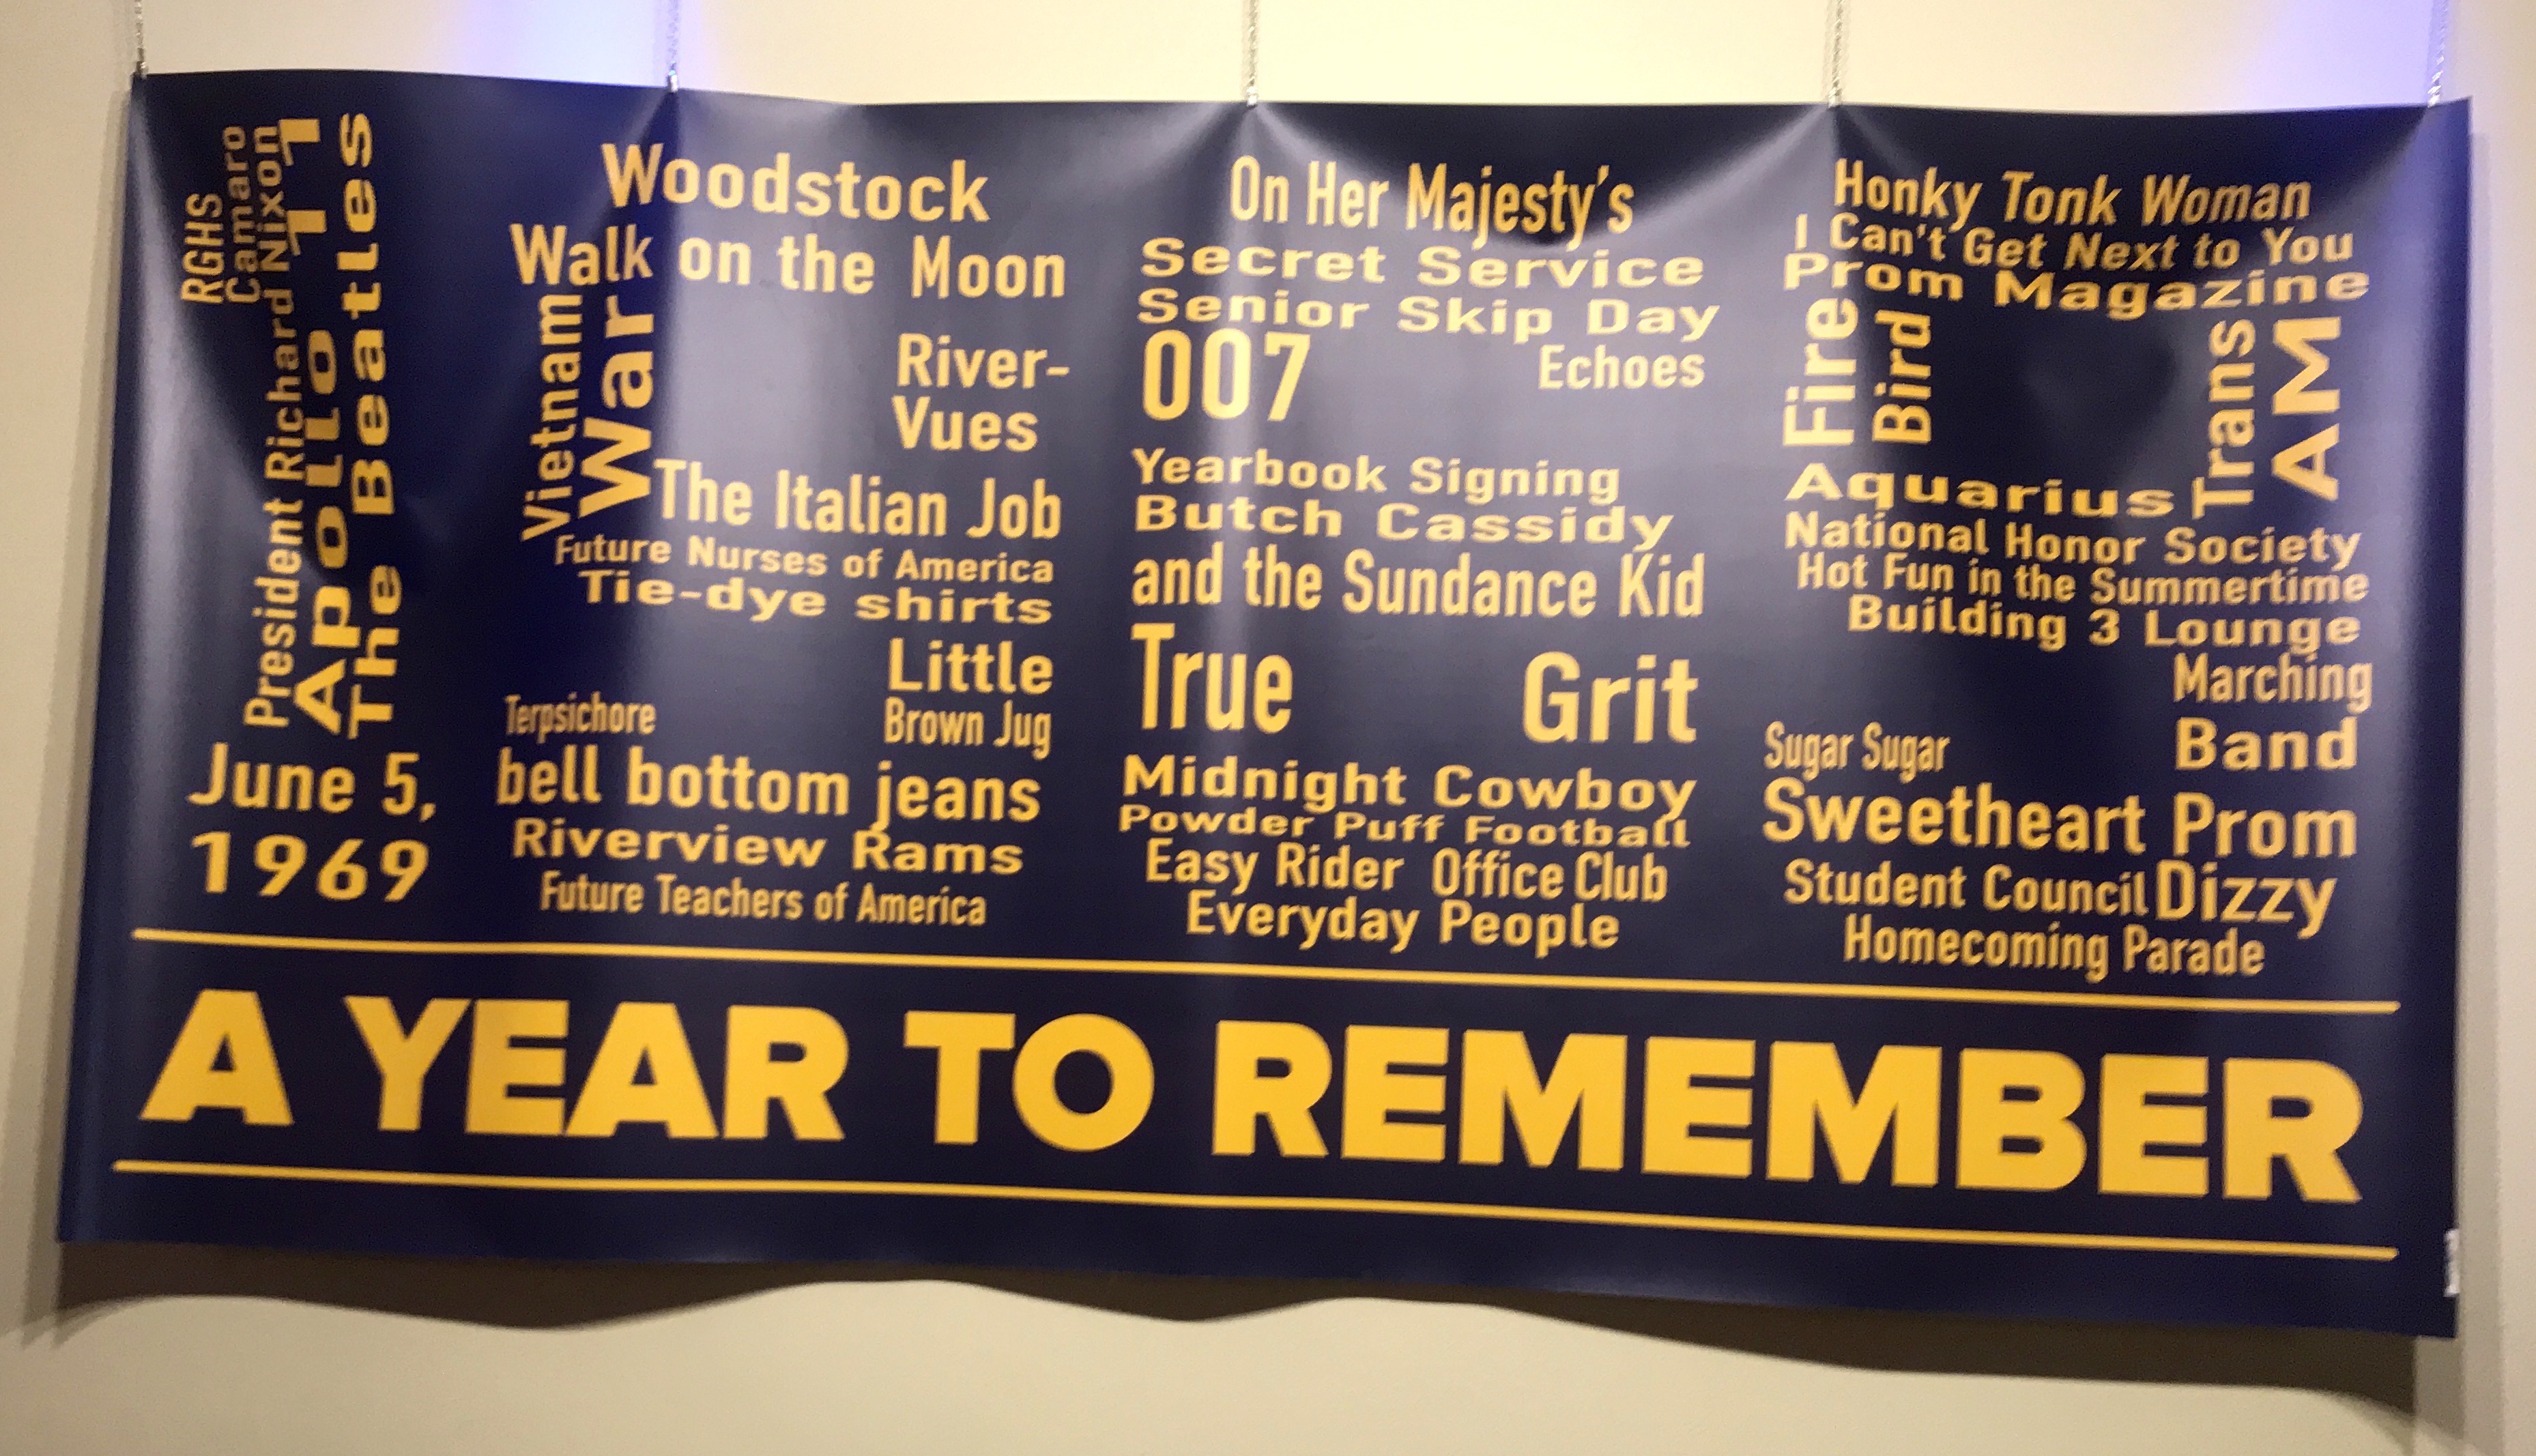 1969 A YEAR TO REMEMBER COMMEMORATIVE BANNER by Dorothy Fey